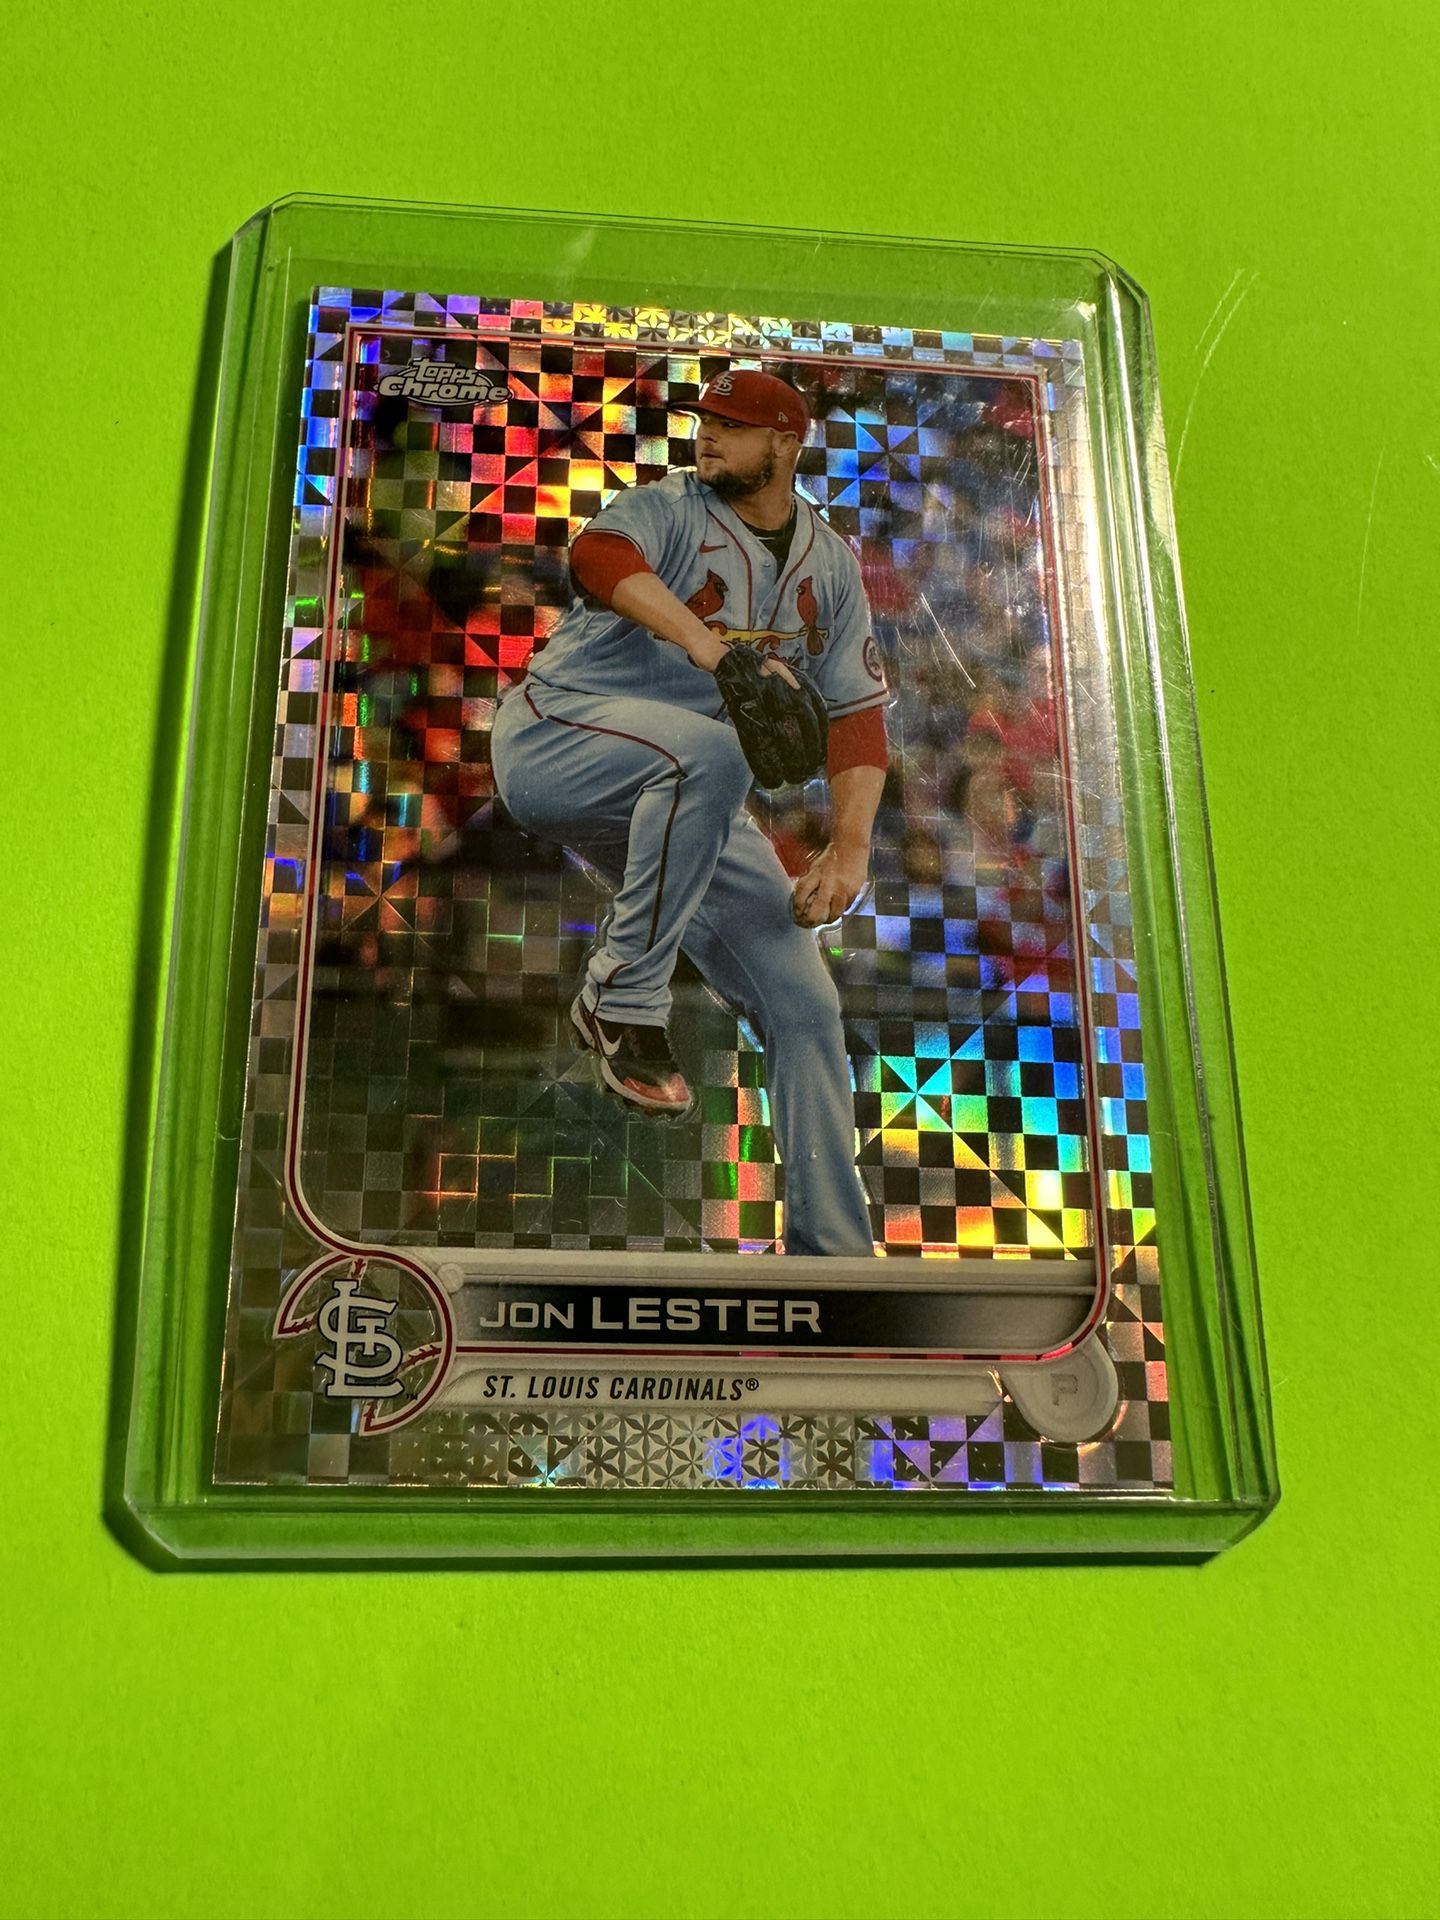 2022 Topps MLB Jon Lester Refractor Card St Louis Cardinals for Sale in  Lacey, WA - OfferUp